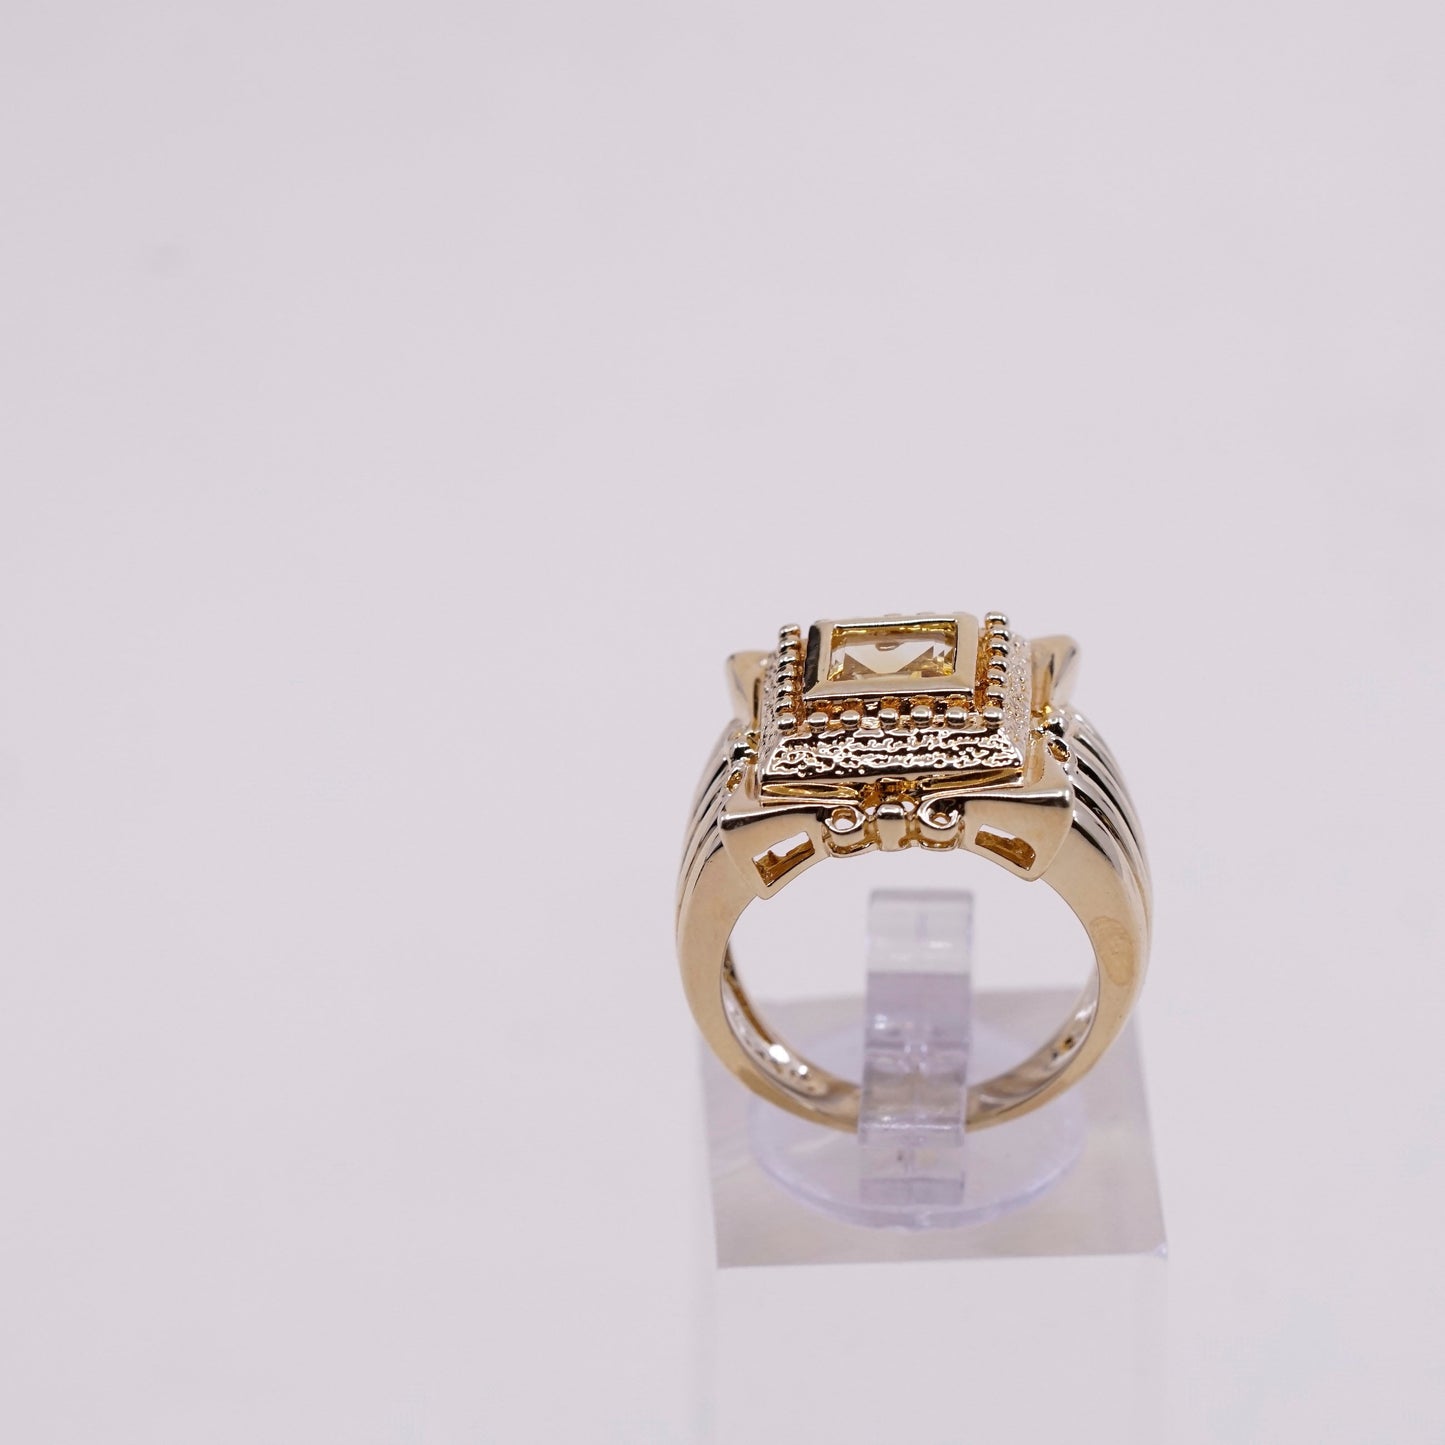 sz 6, vermeil gold over sterling silver citrine 925 statement cocktail ring